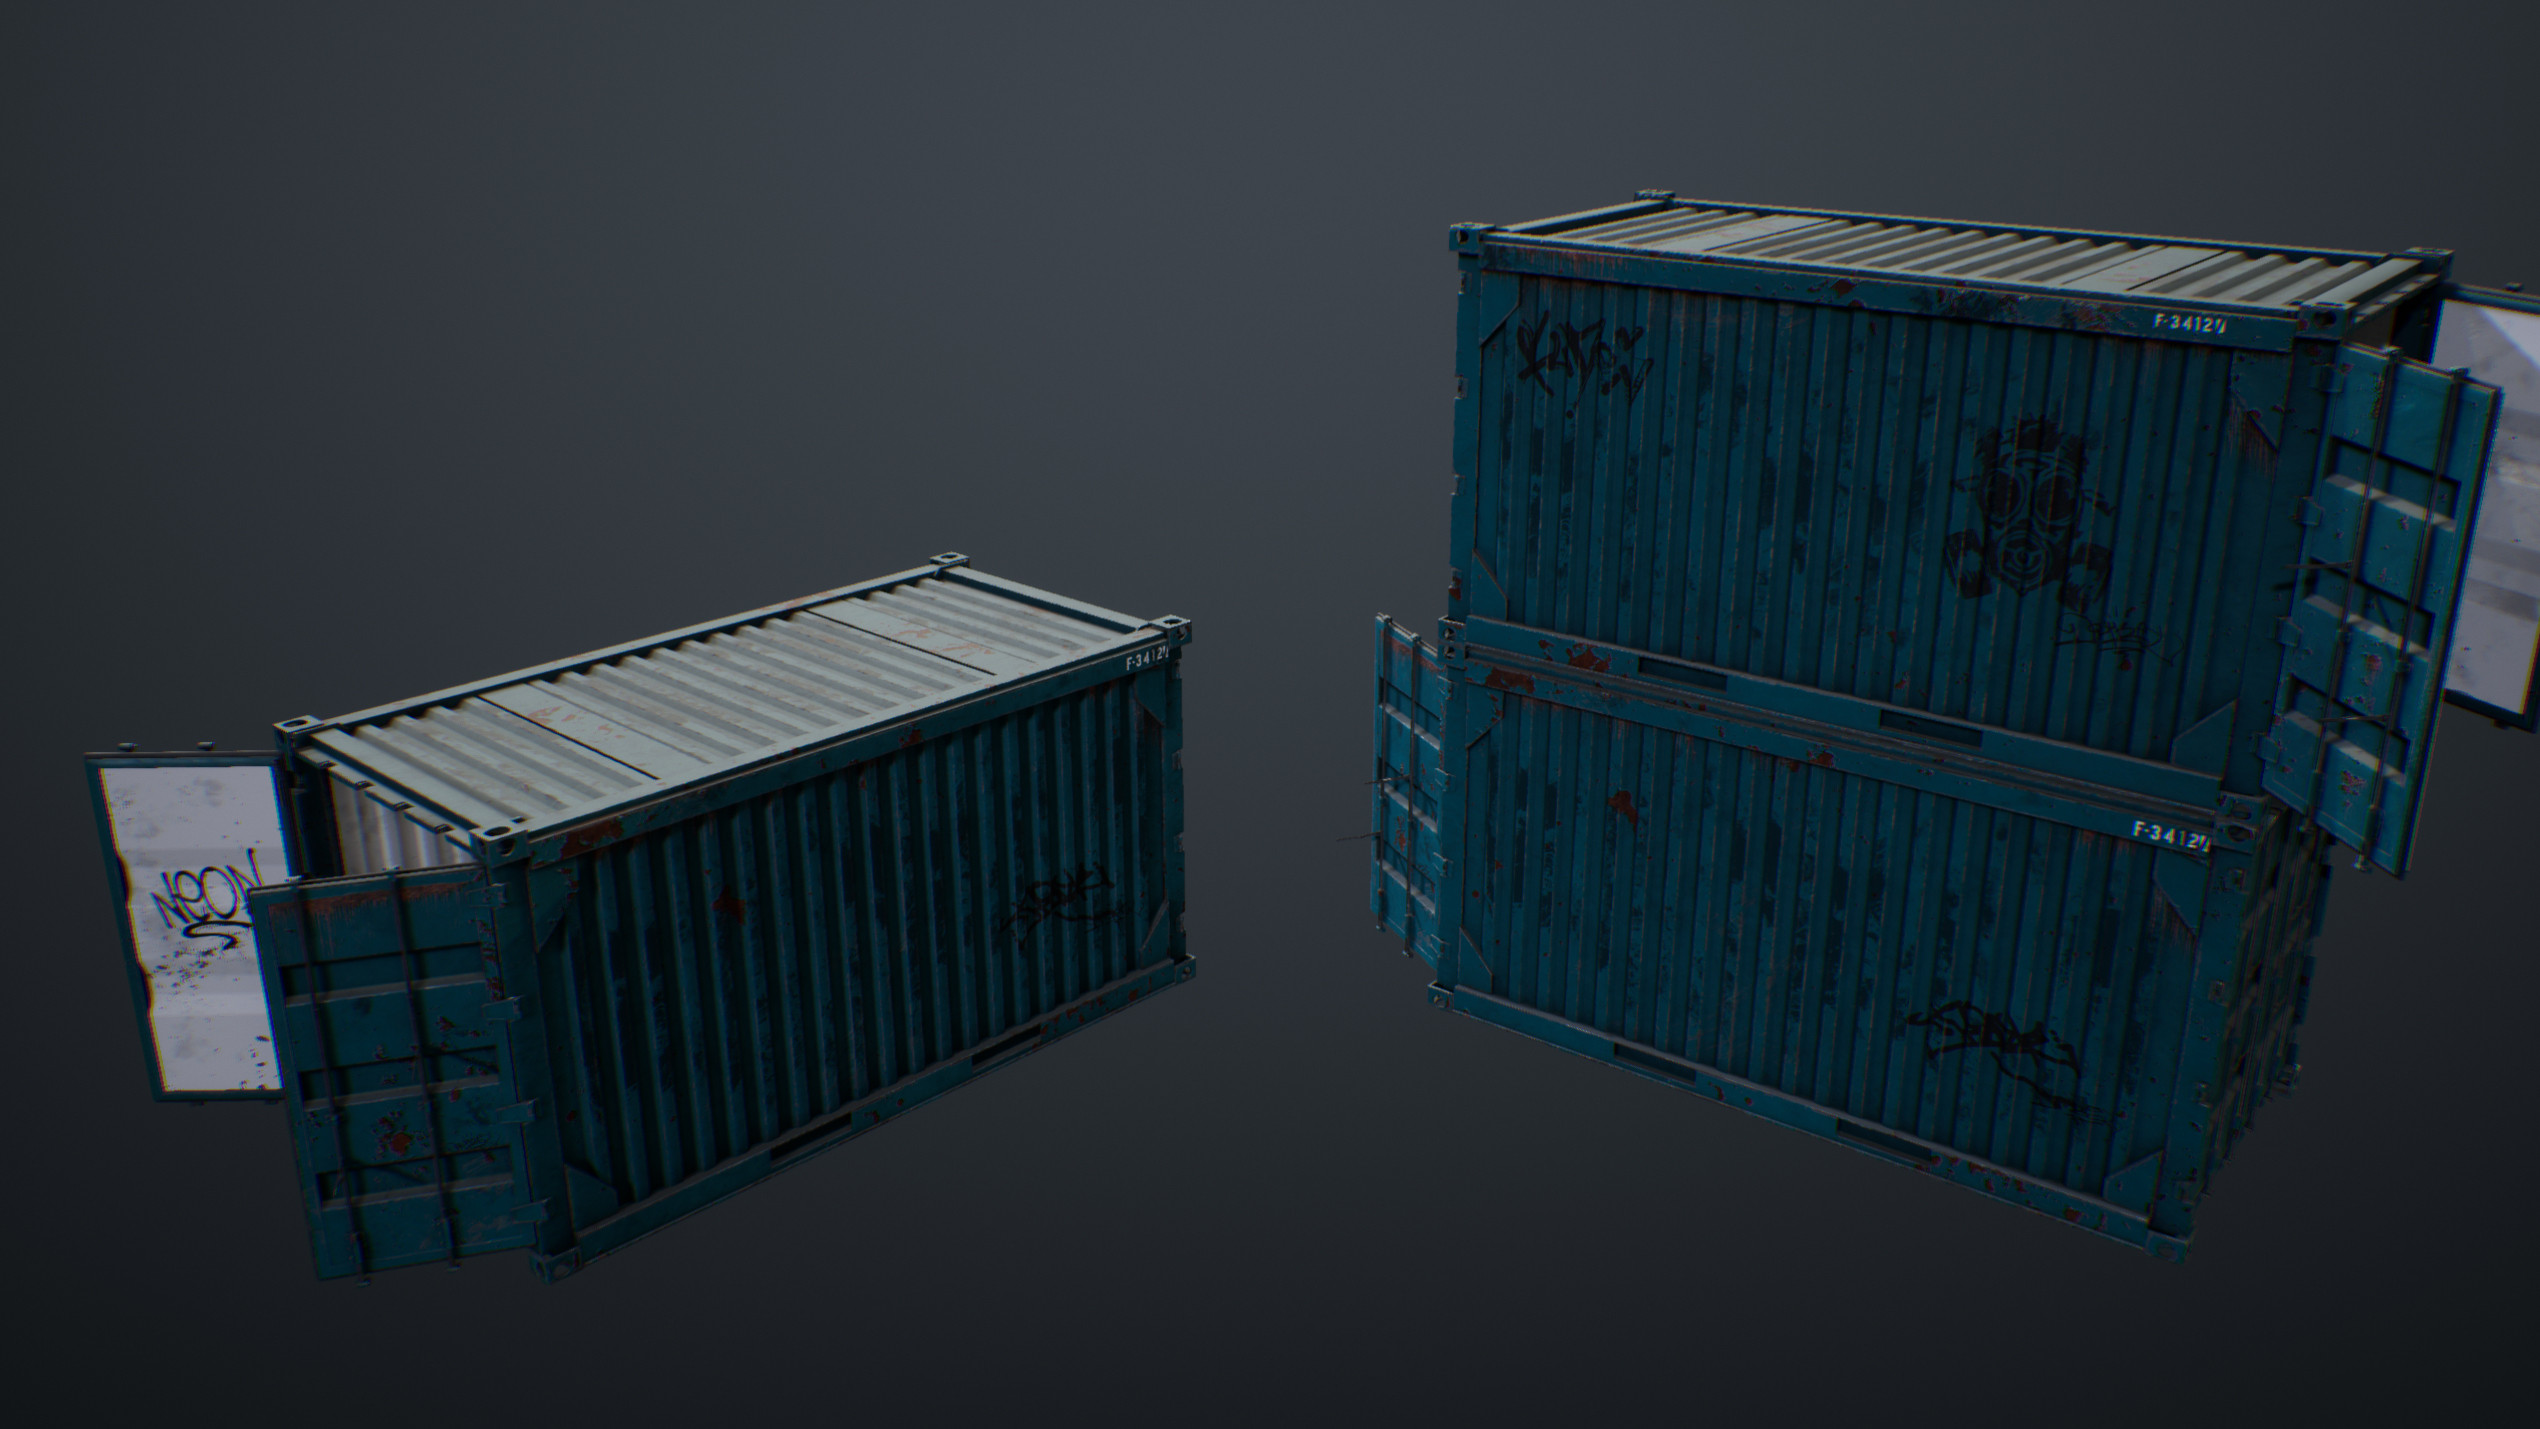 UE4 screenshot back view shot of containers.